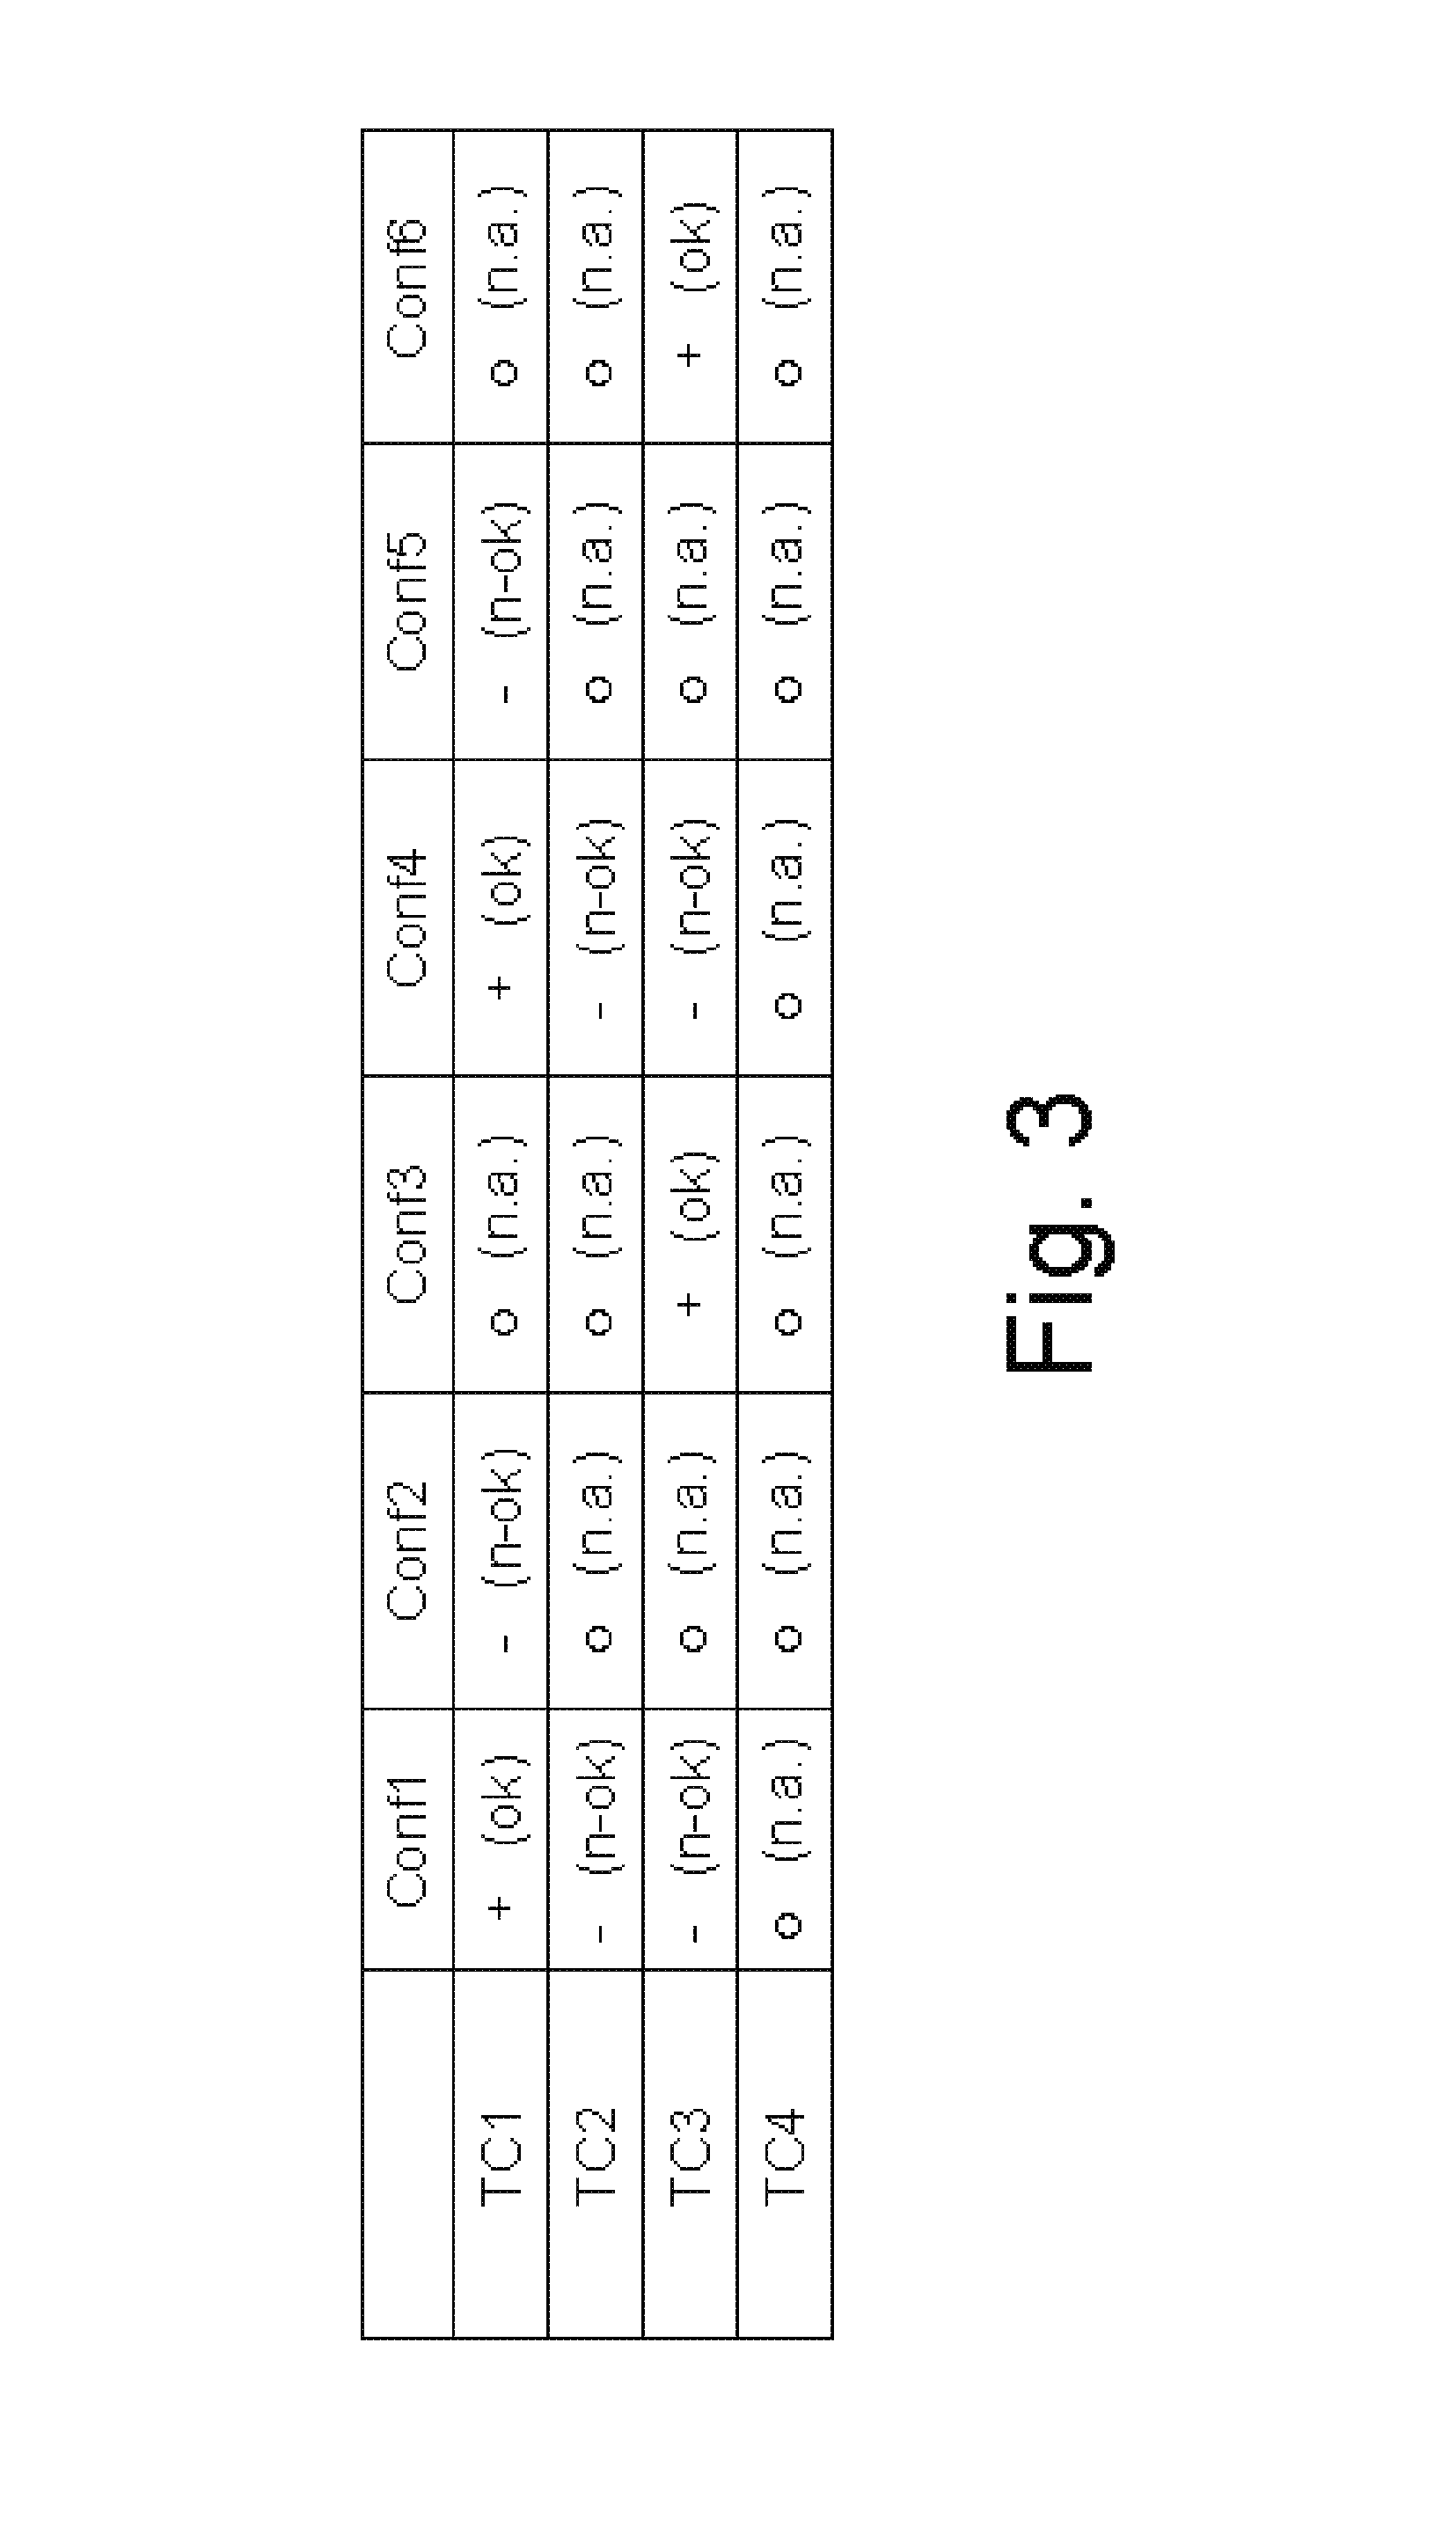 Method and system for testing a mechatronic system